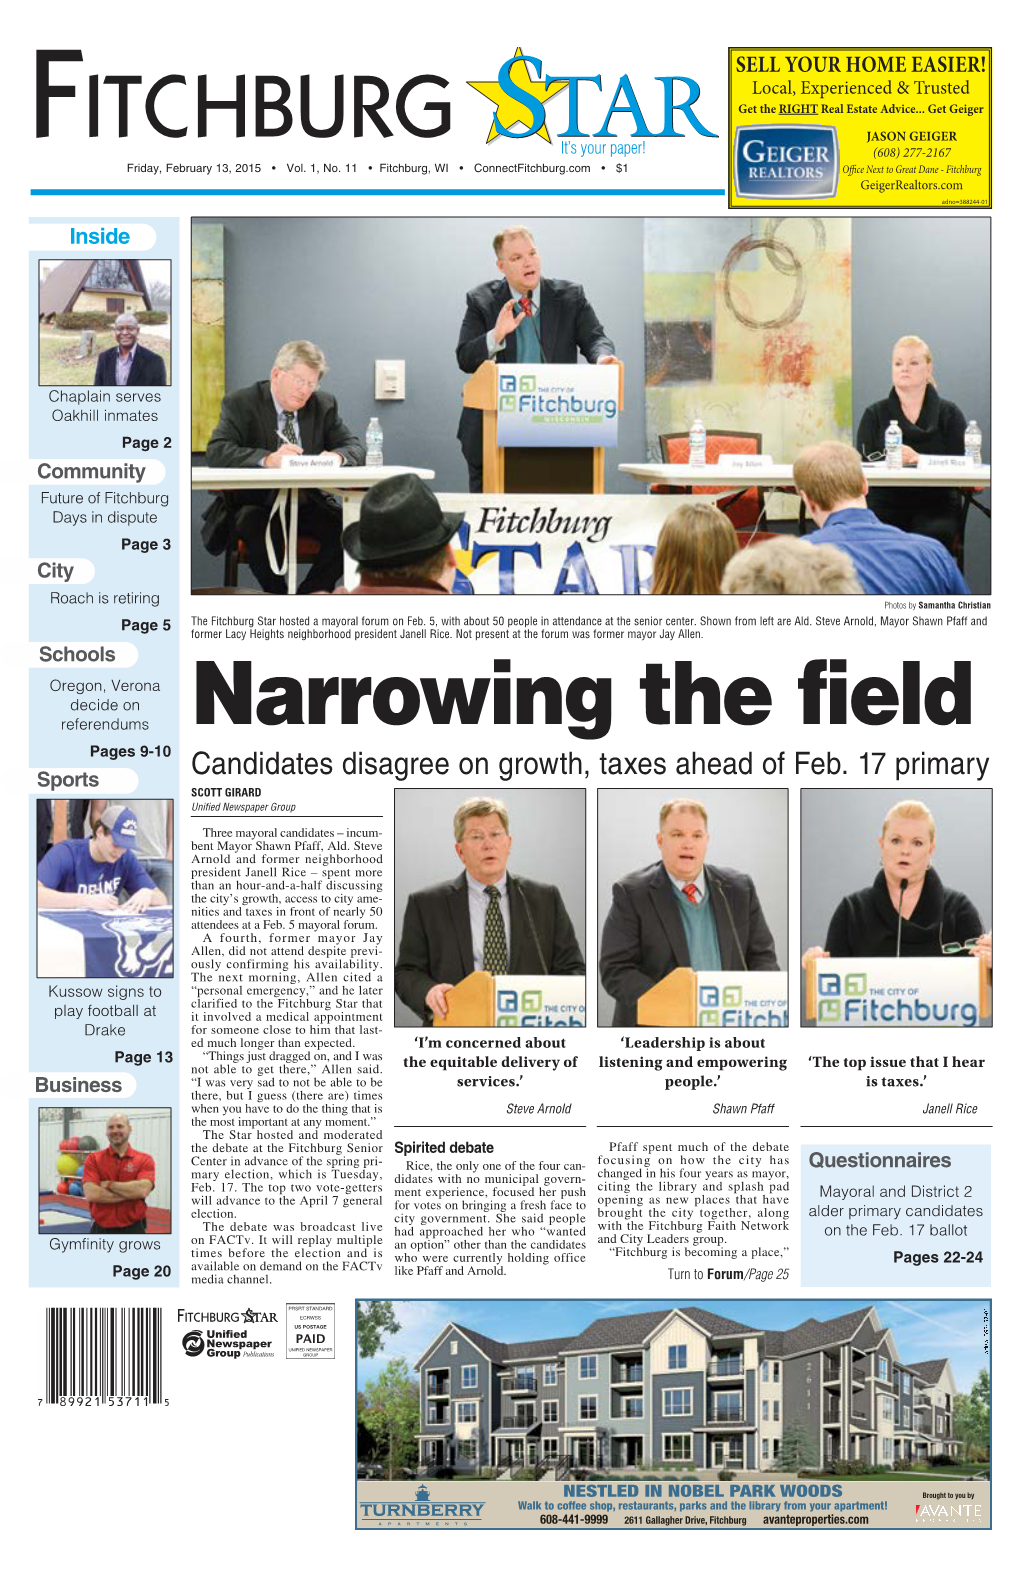 Candidates Disagree on Growth, Taxes Ahead of Feb. 17 Primary Scott Girard Unified Newspaper Group